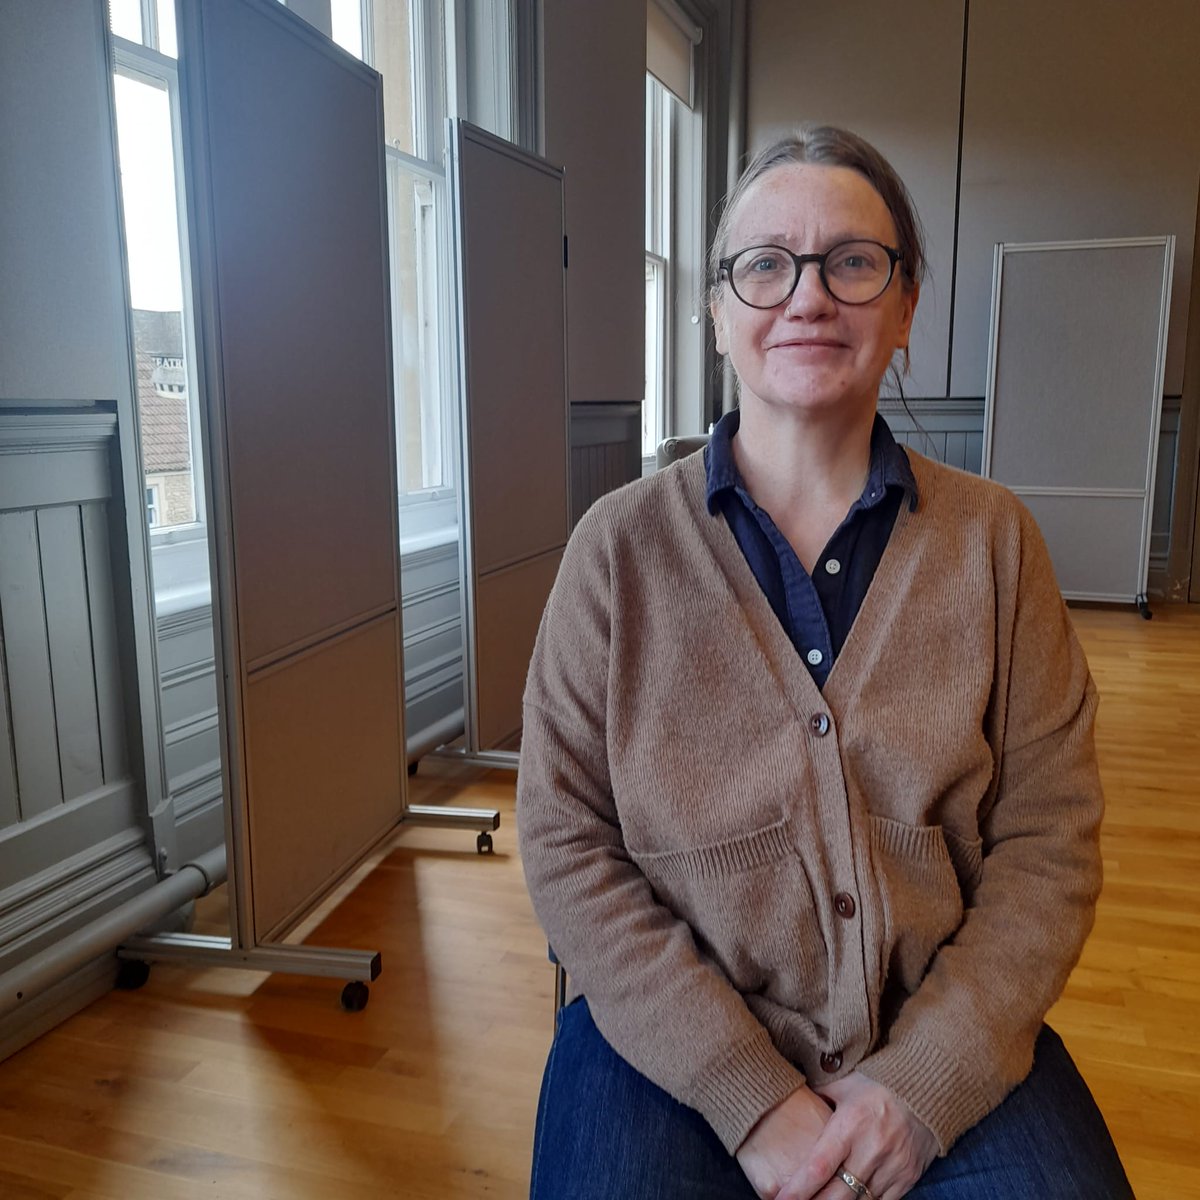 📣 20 days until Community Retrofit Lead, Sally Richards, hosts the first of a series of talks at the town hall around Frome's Retrofit project. Join the guest list for the talk on 30th April ➡️ bit.ly/retrofit-30th-… and read more on the project ➡ frometowncouncil.gov.uk/retrofit-talks…